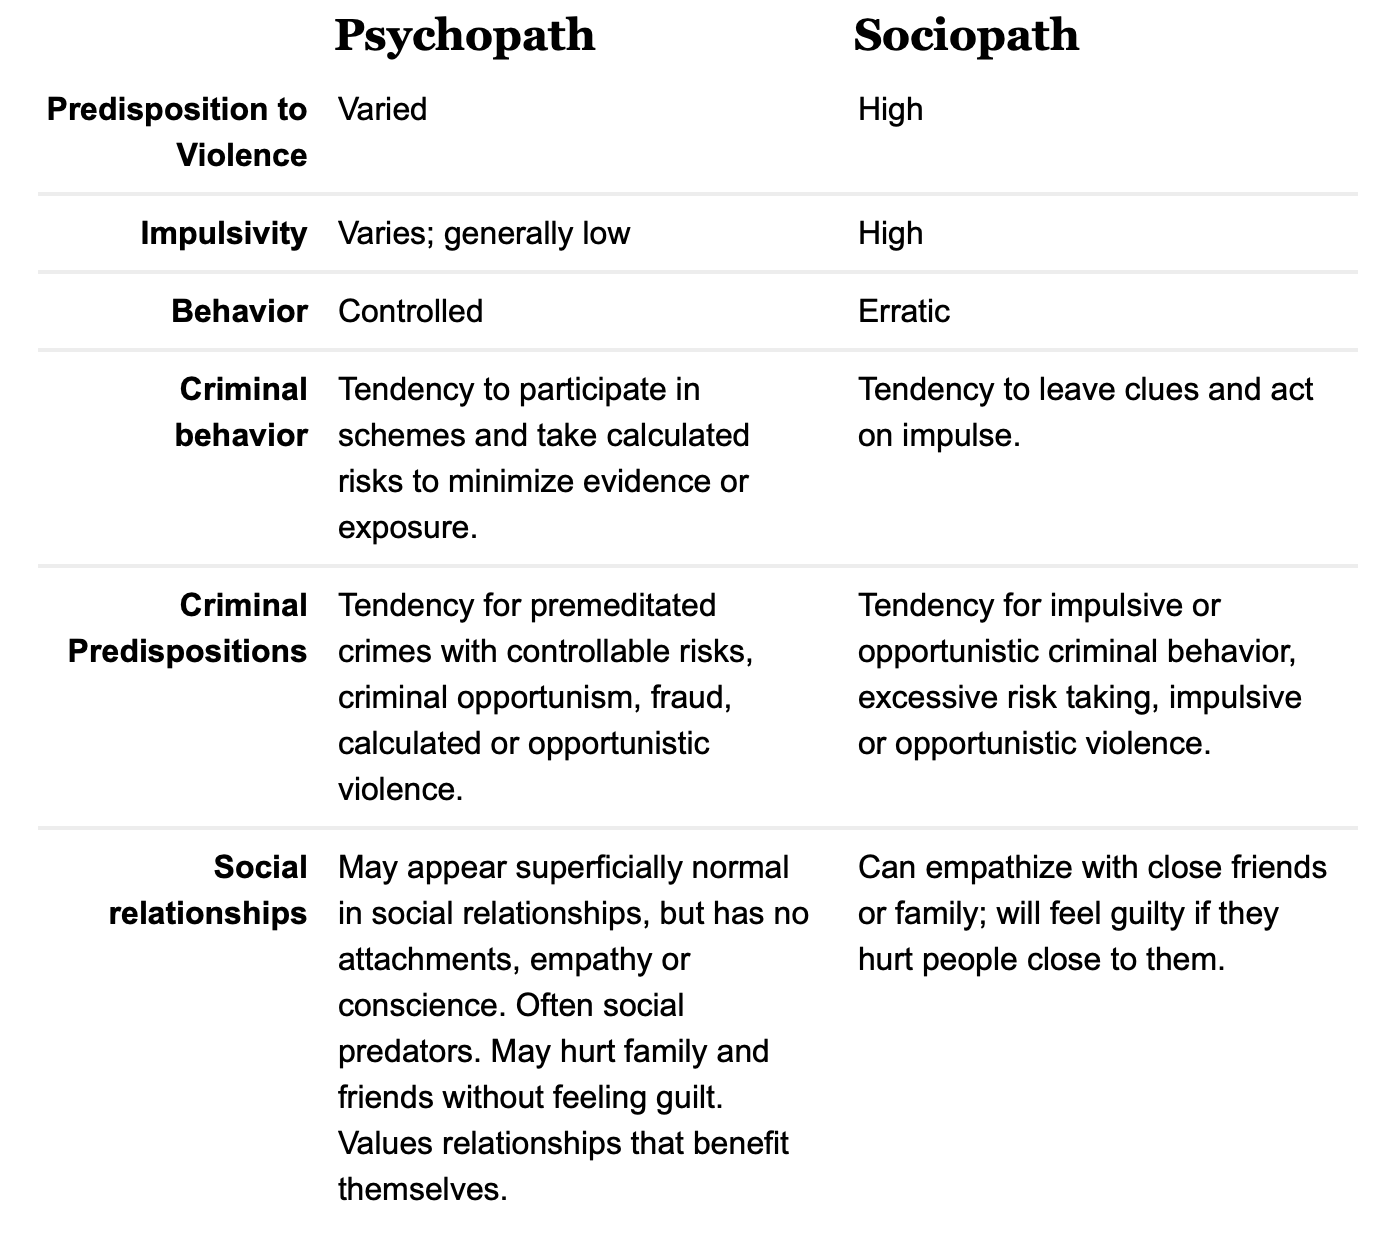 How Sociopaths Are Different from Psychopaths